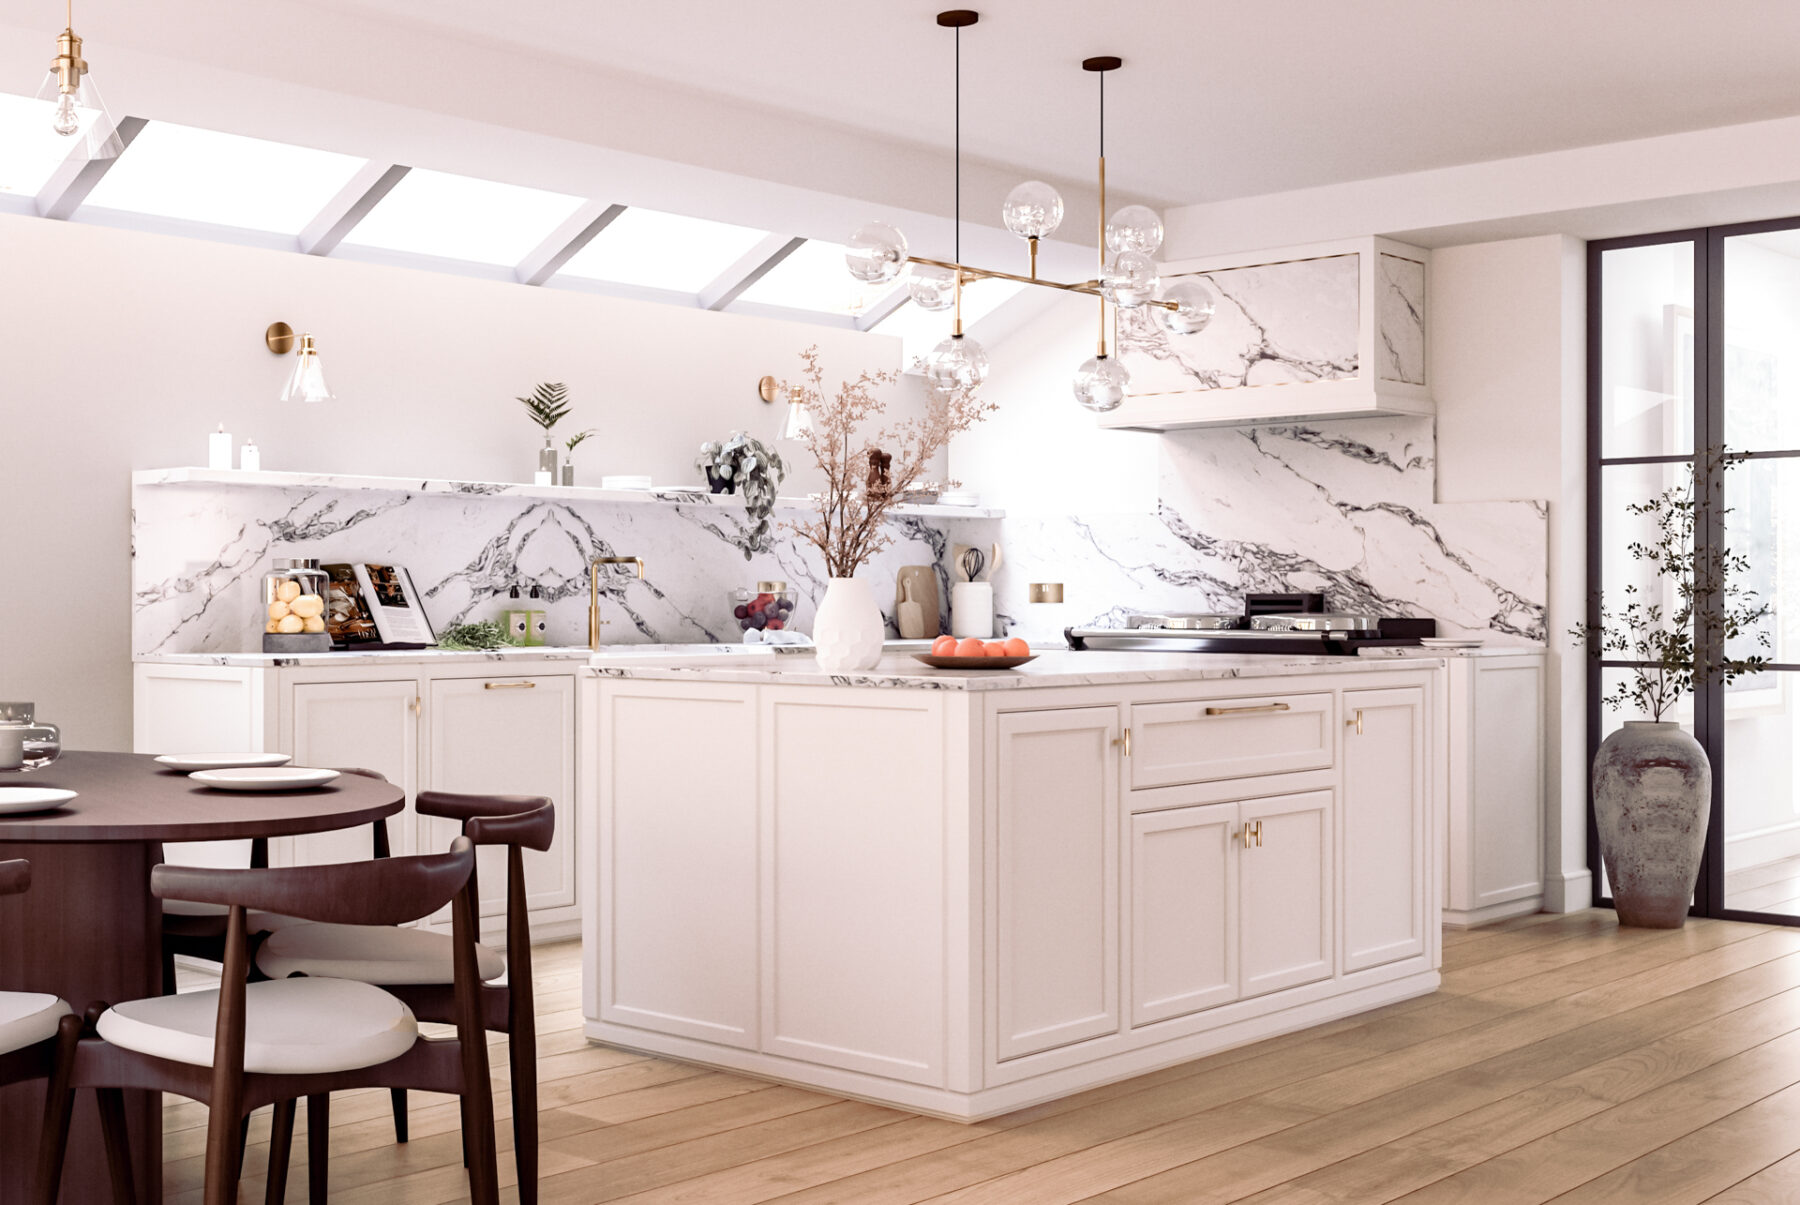 Quintesse, a Hand-Painted Shaker Kitchen in White by Modern British